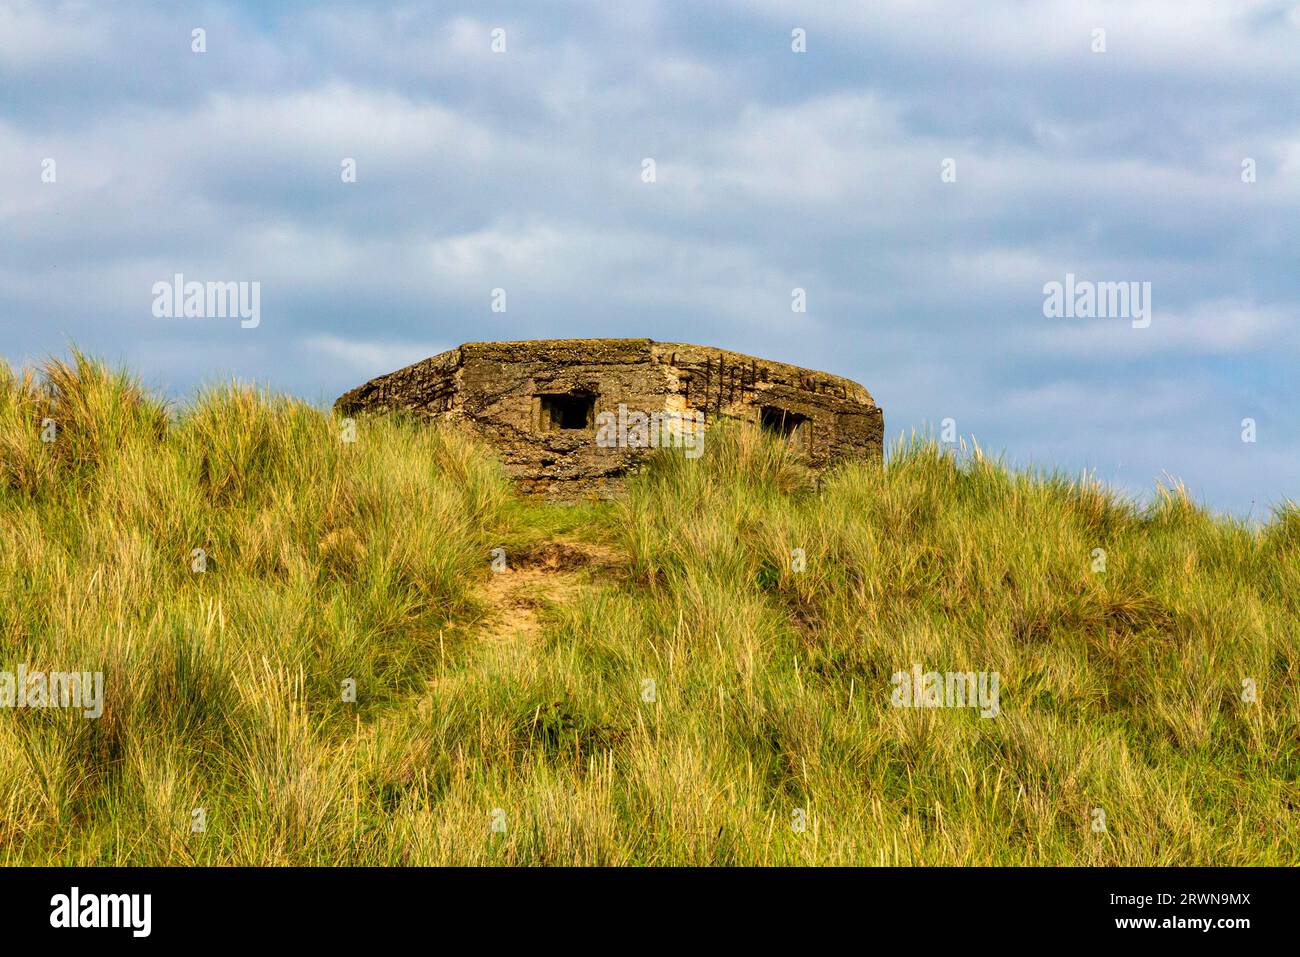 Second World War pill box on Horsey beach Norfolk England UK built as a defensive structure c1940 as part of the British anti invasion preparations. Stock Photo